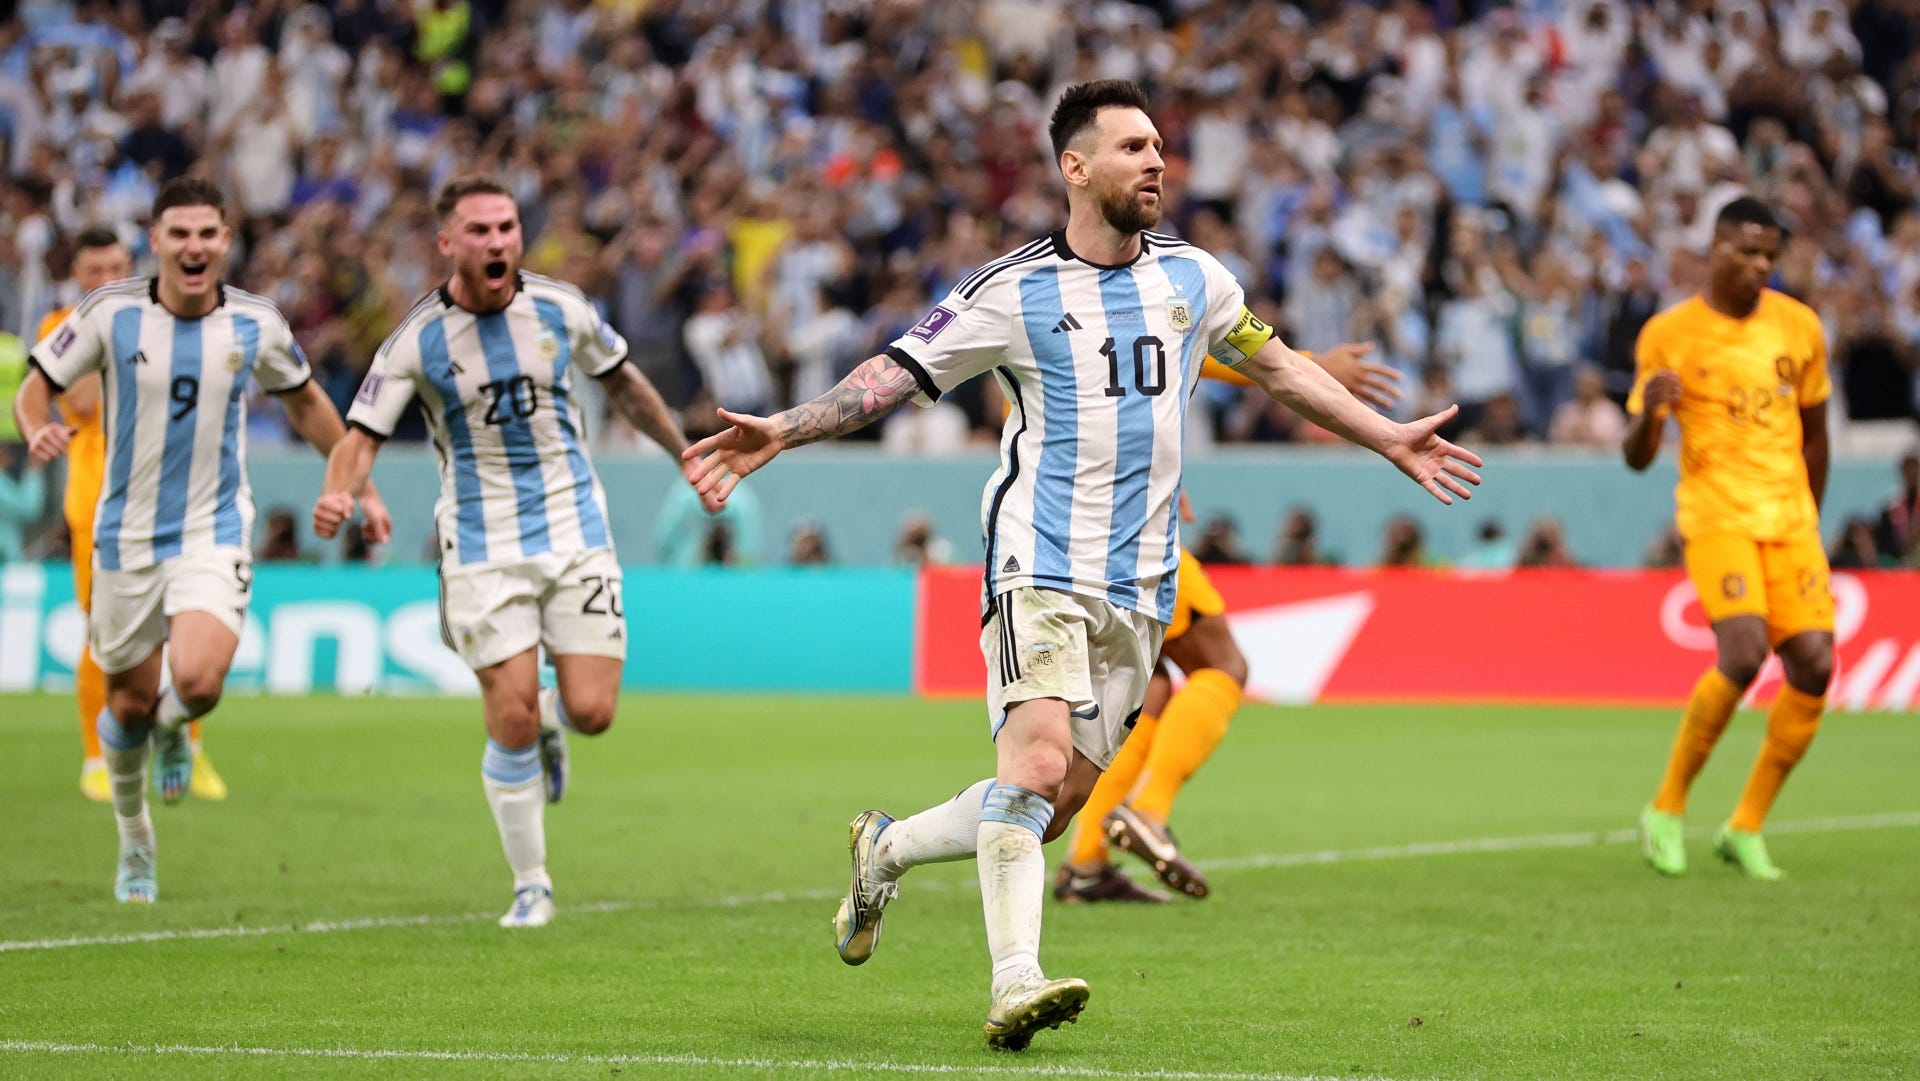 'A hell of a story' - Fans react as Argentina and Messi triumph in World Cup penalty shootout against Netherlands | Goal.com US